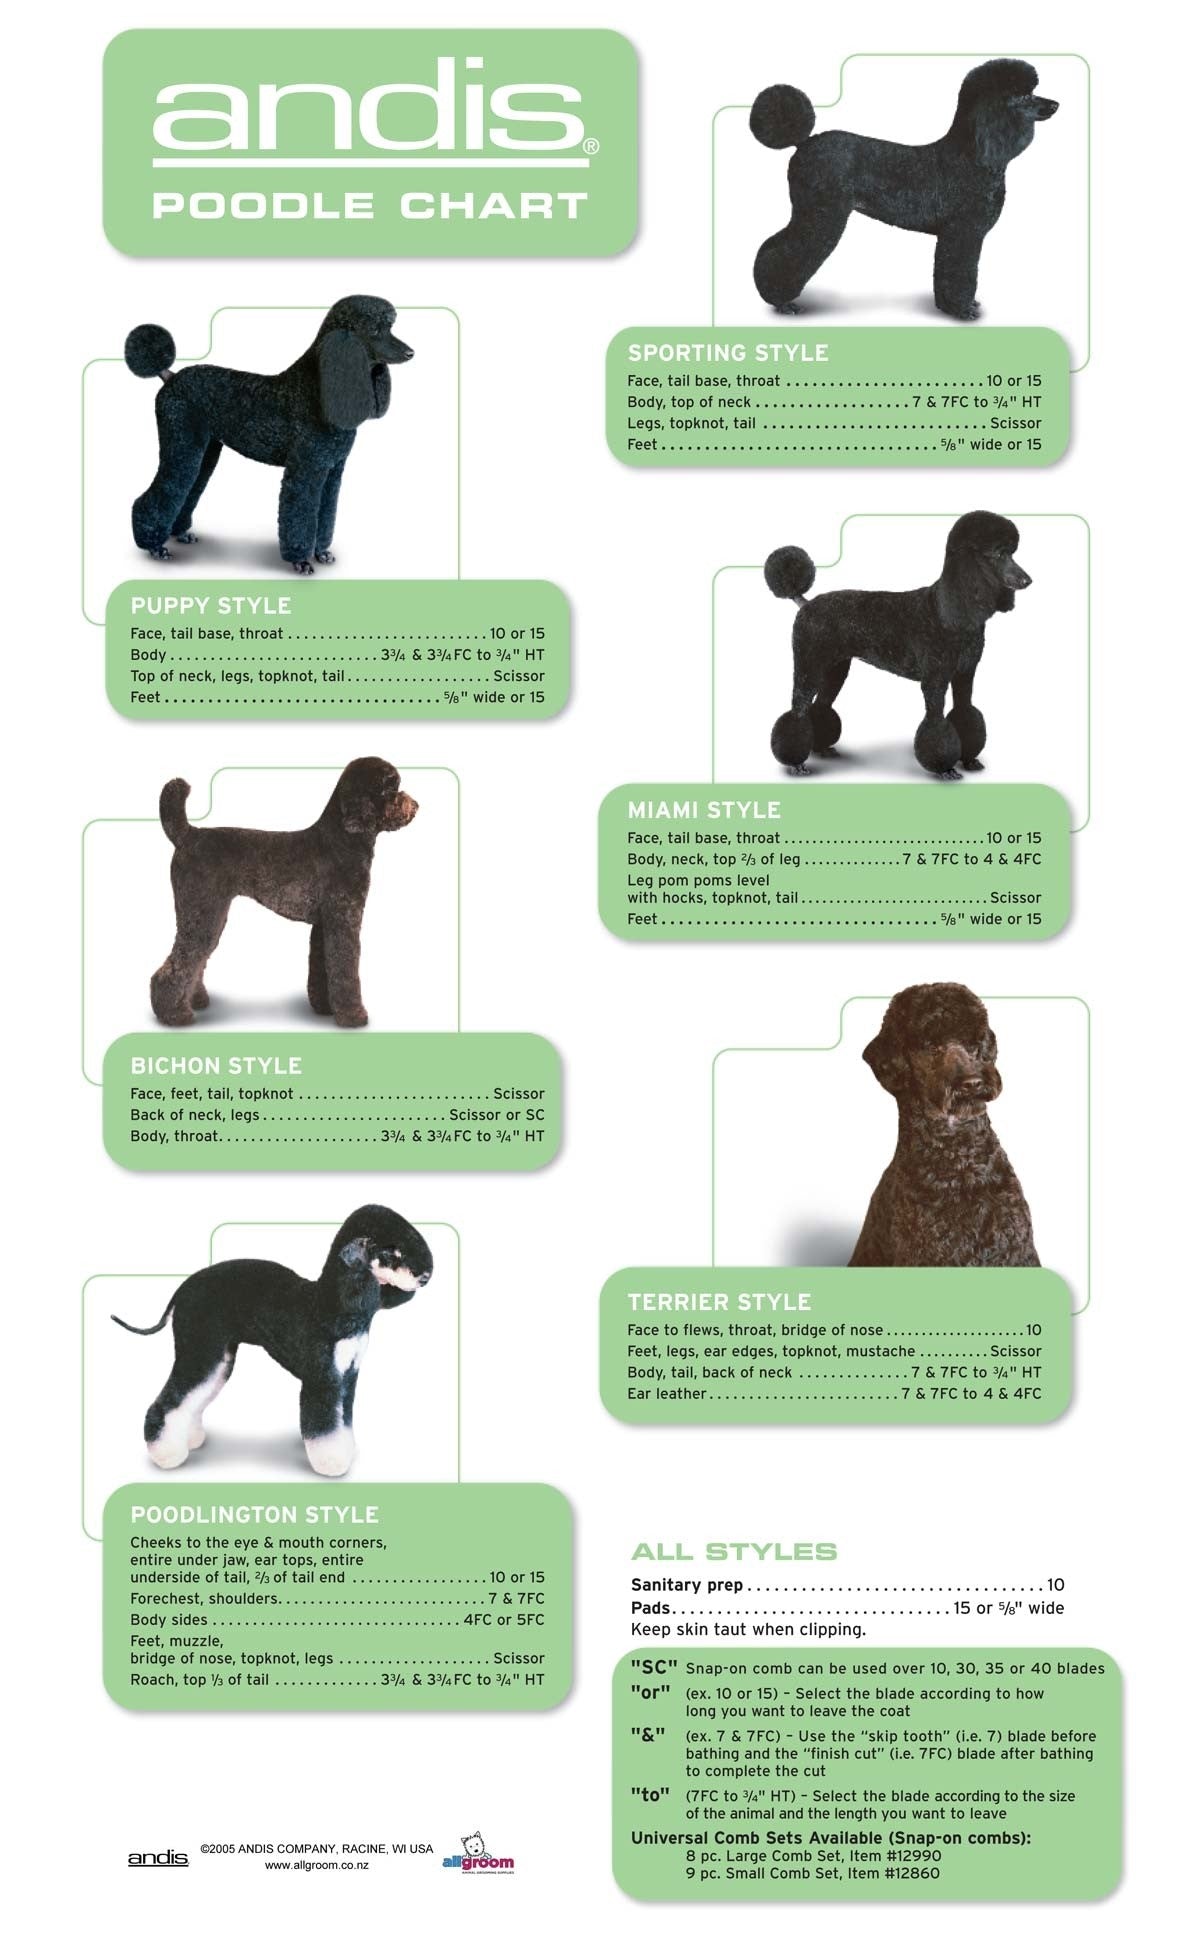 drawings showing different styles of more traditional poodle clips